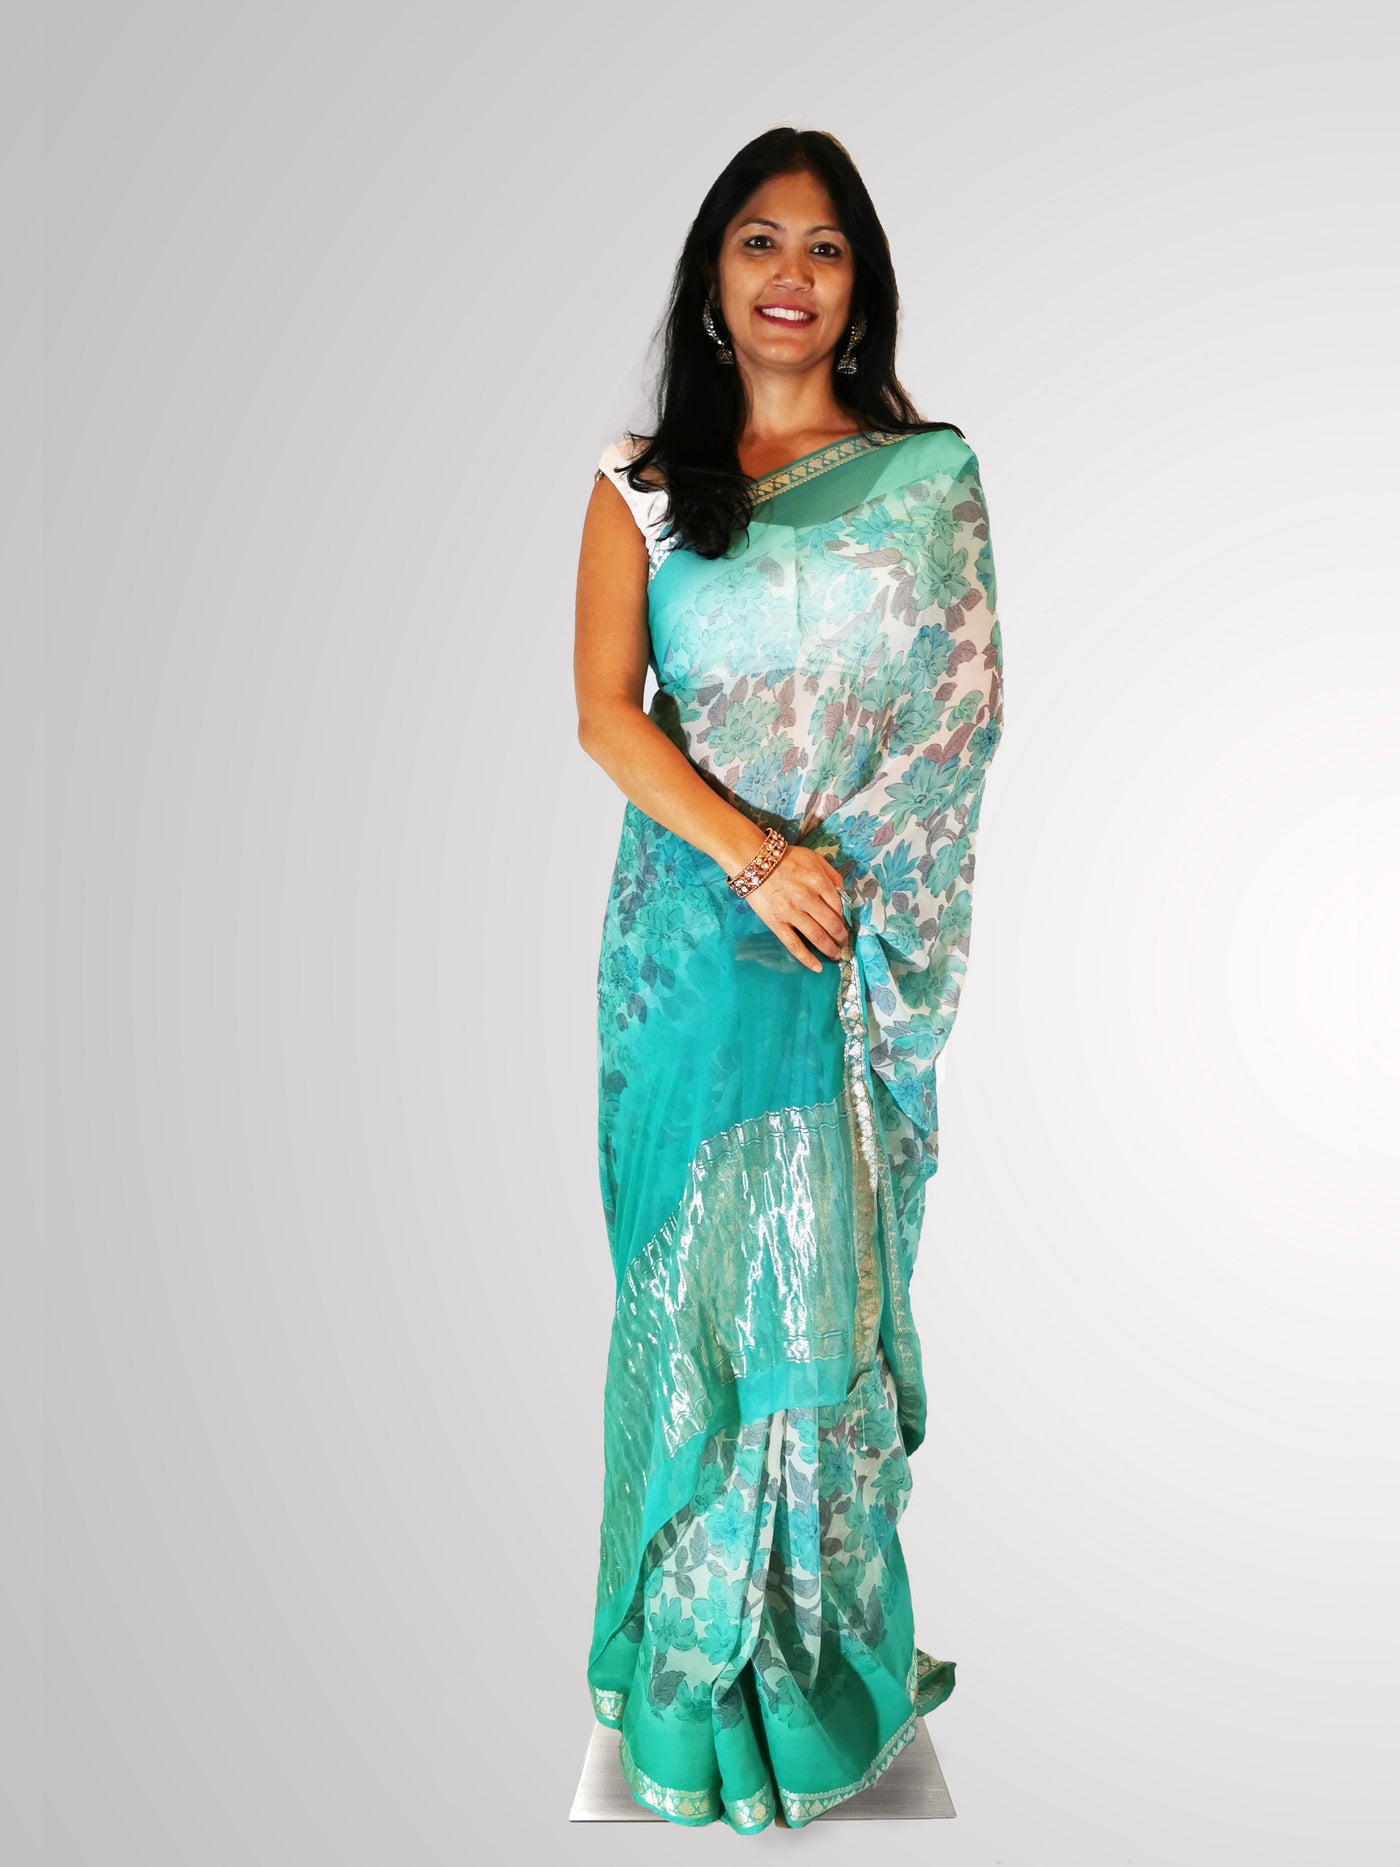 Saree in Aqua Turquoise and Gray in Floral Printed Chiffon - Indian Clothing in Denver, CO, Aurora, CO, Boulder, CO, Fort Collins, CO, Colorado Springs, CO, Parker, CO, Highlands Ranch, CO, Cherry Creek, CO, Centennial, CO, and Longmont, CO. Nationwide shipping USA - India Fashion X